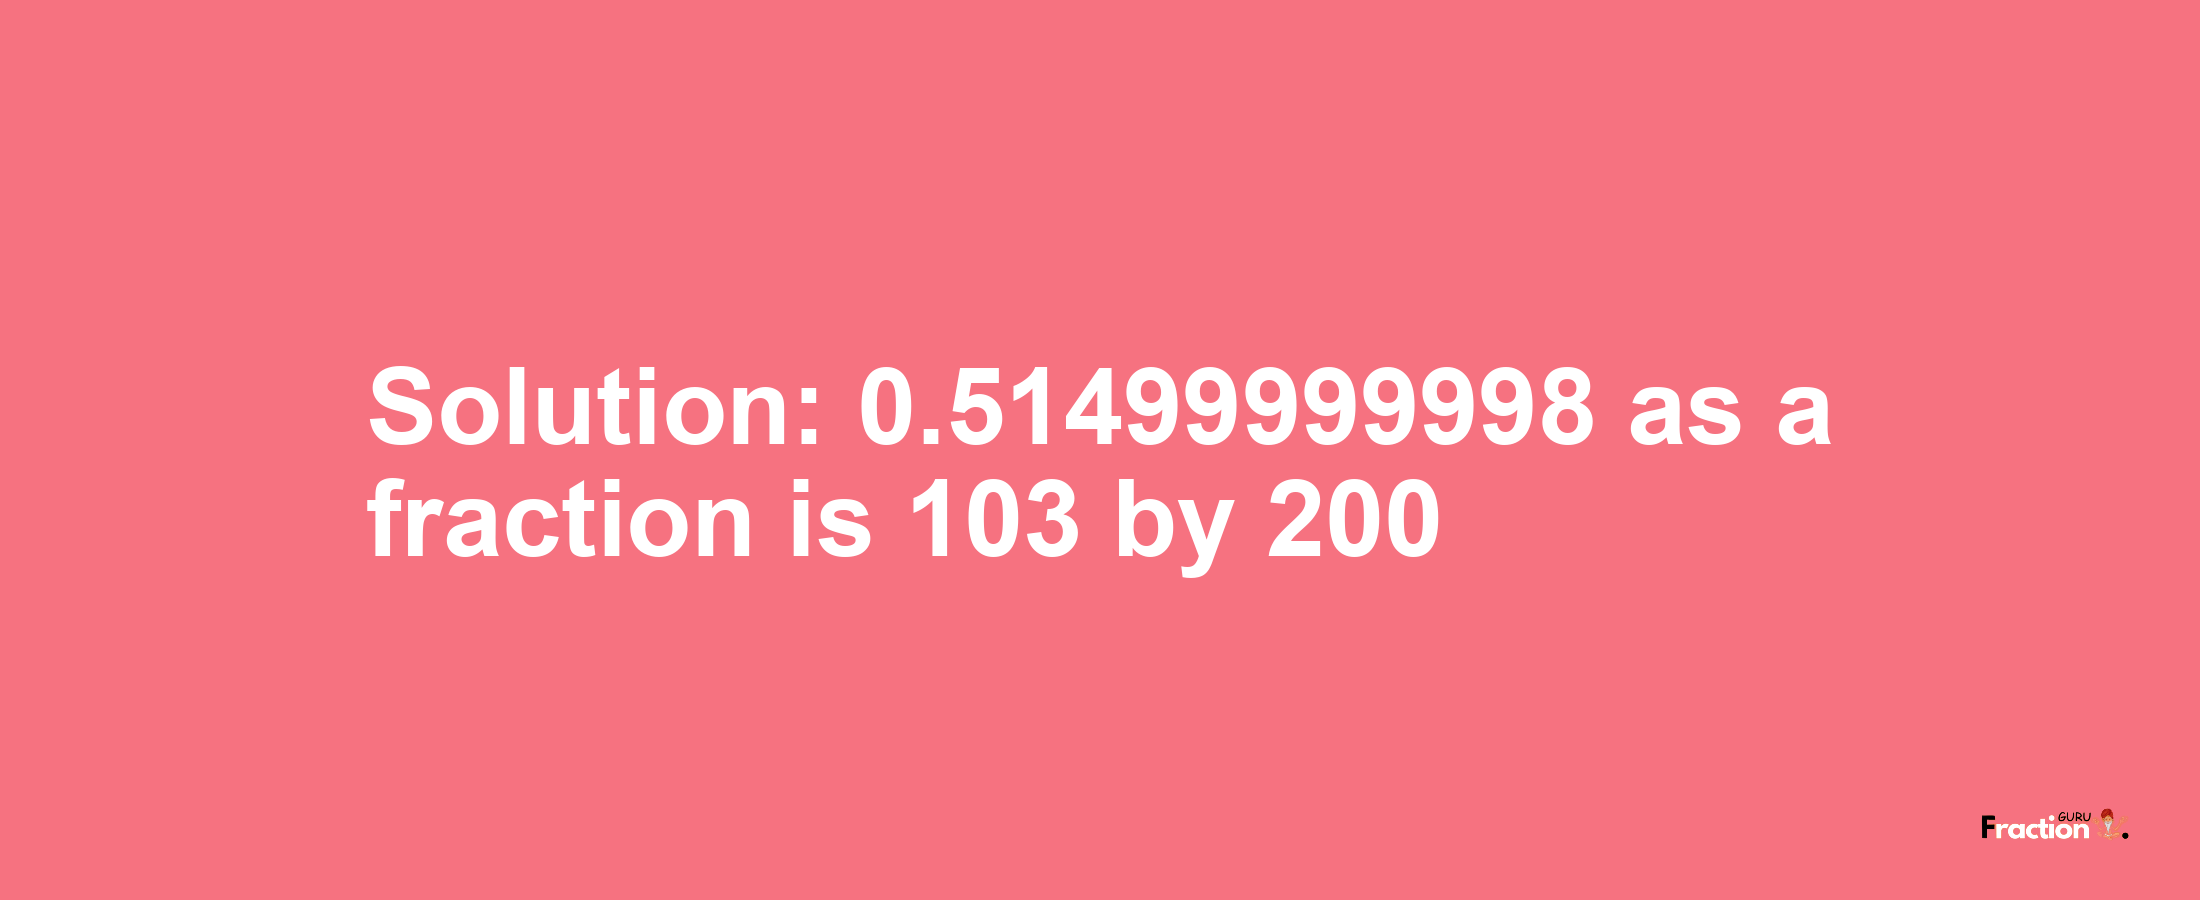 Solution:0.51499999998 as a fraction is 103/200